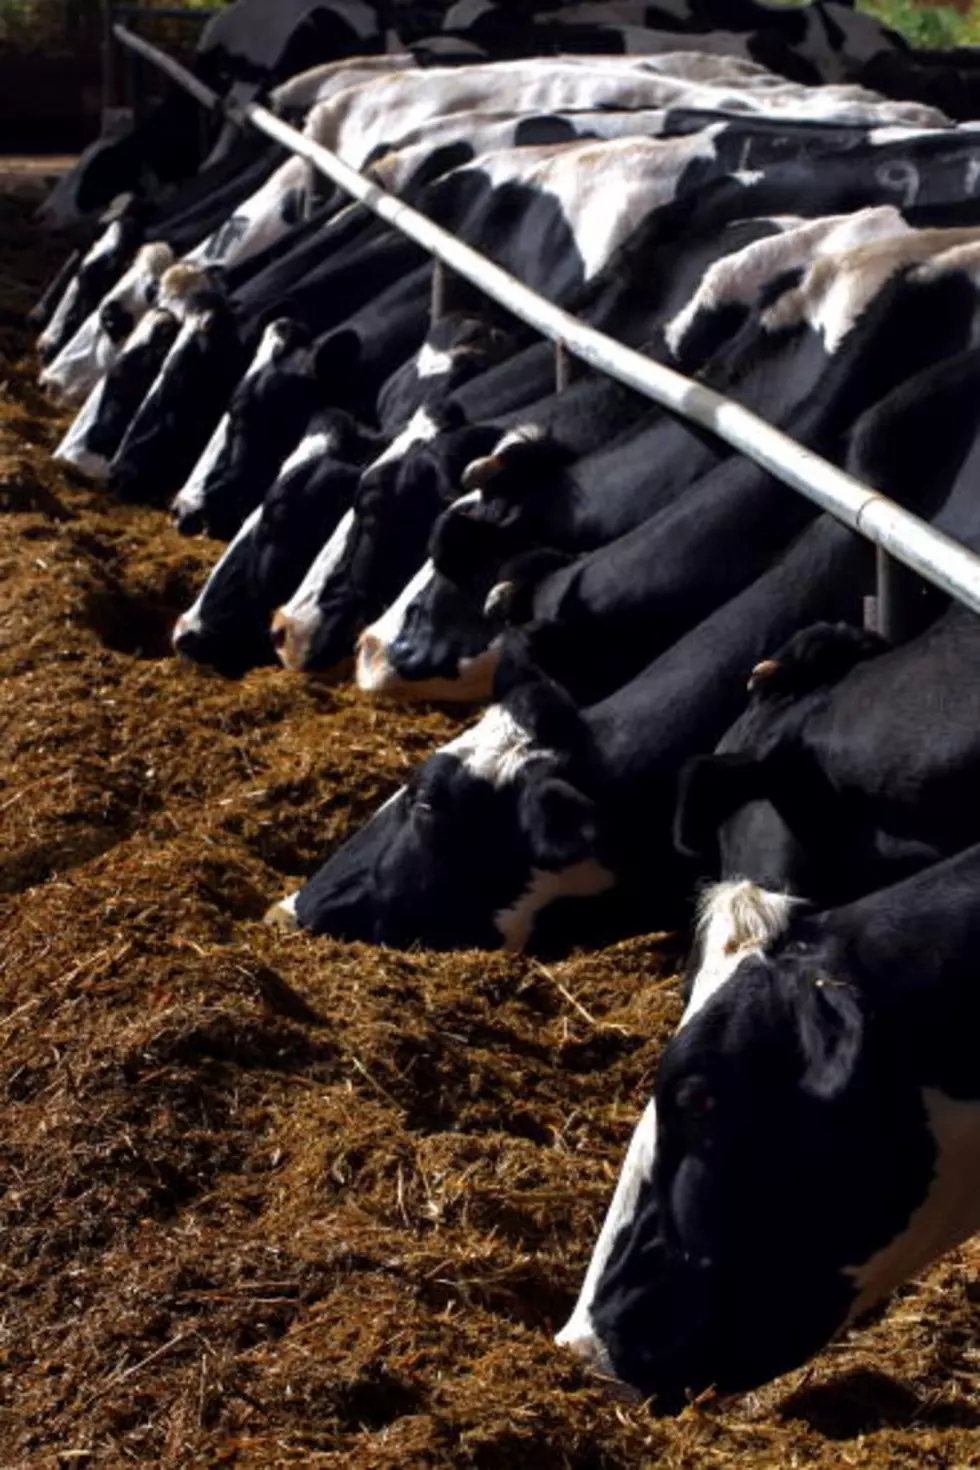 Ag News: Milk Supply Outpaces Demand